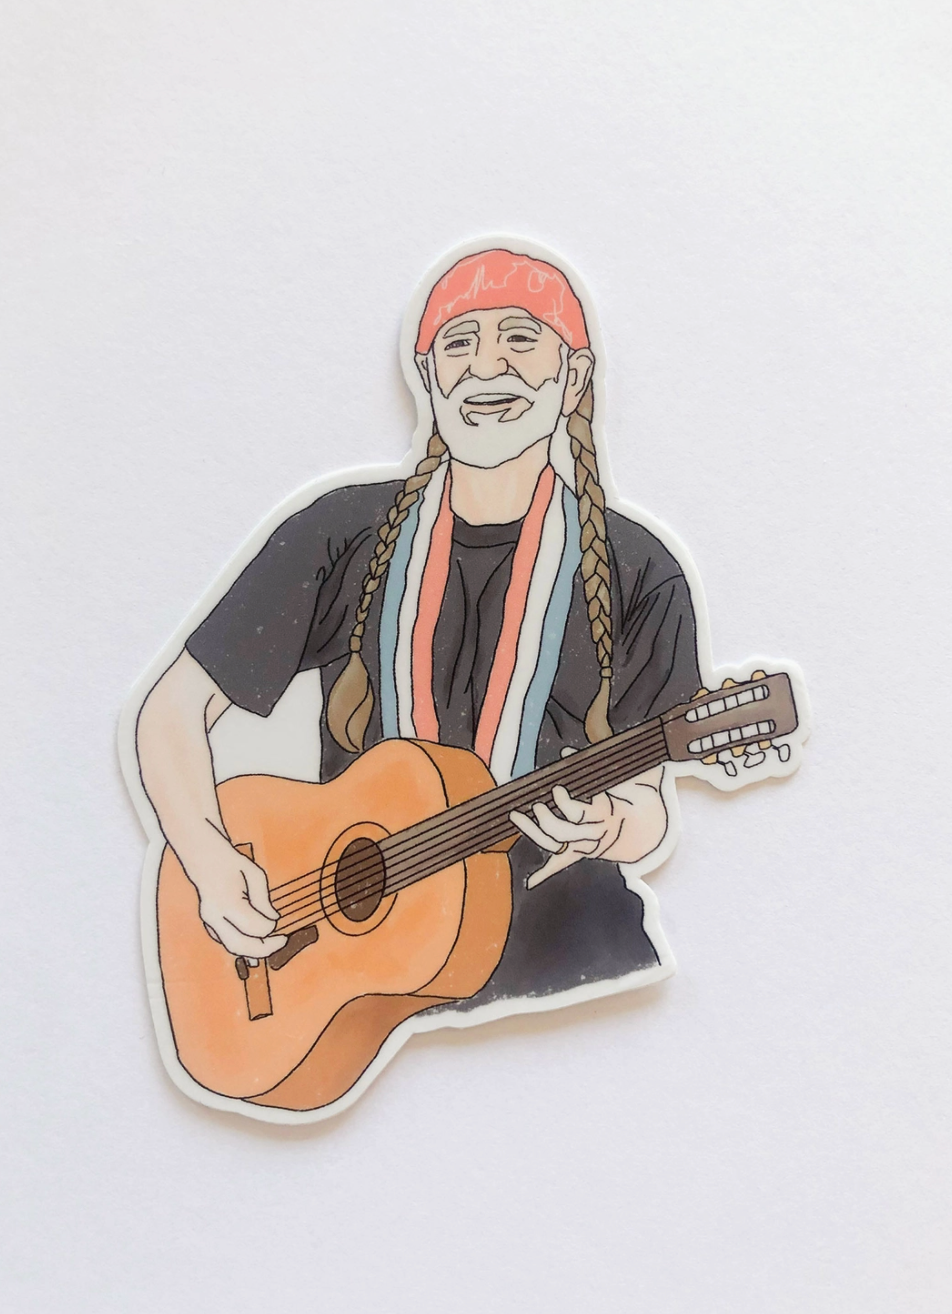 High quality, matte vinyl stickers \\ waterproof, size: 3" x 3.5". A great gift for someone who loves Willie! This could go on a guitar, a car, a favorite notebook, or a water bottle.Ramble & Co. is a family owned business. Shop at shop.rambleandcompany.com or visit our store in Wichita Falls, Texas || small batch/ hand printed tees + fine art prints | your source of encouragement + inspiration.